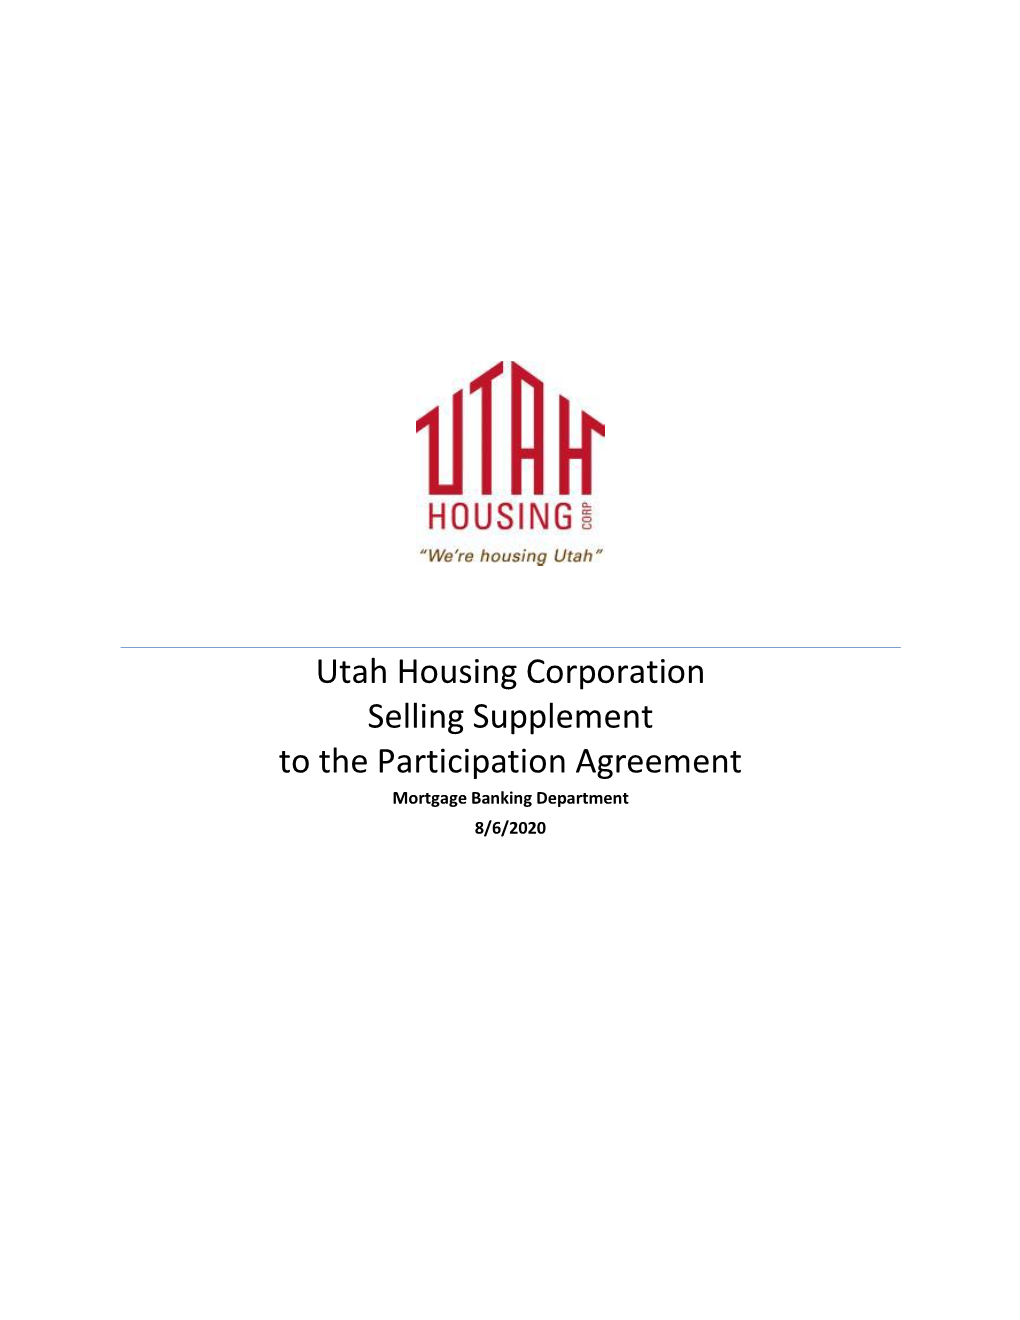 Utah Housing Corporation Selling Supplement to the Participation Agreement Mortgage Banking Department 8/6/2020